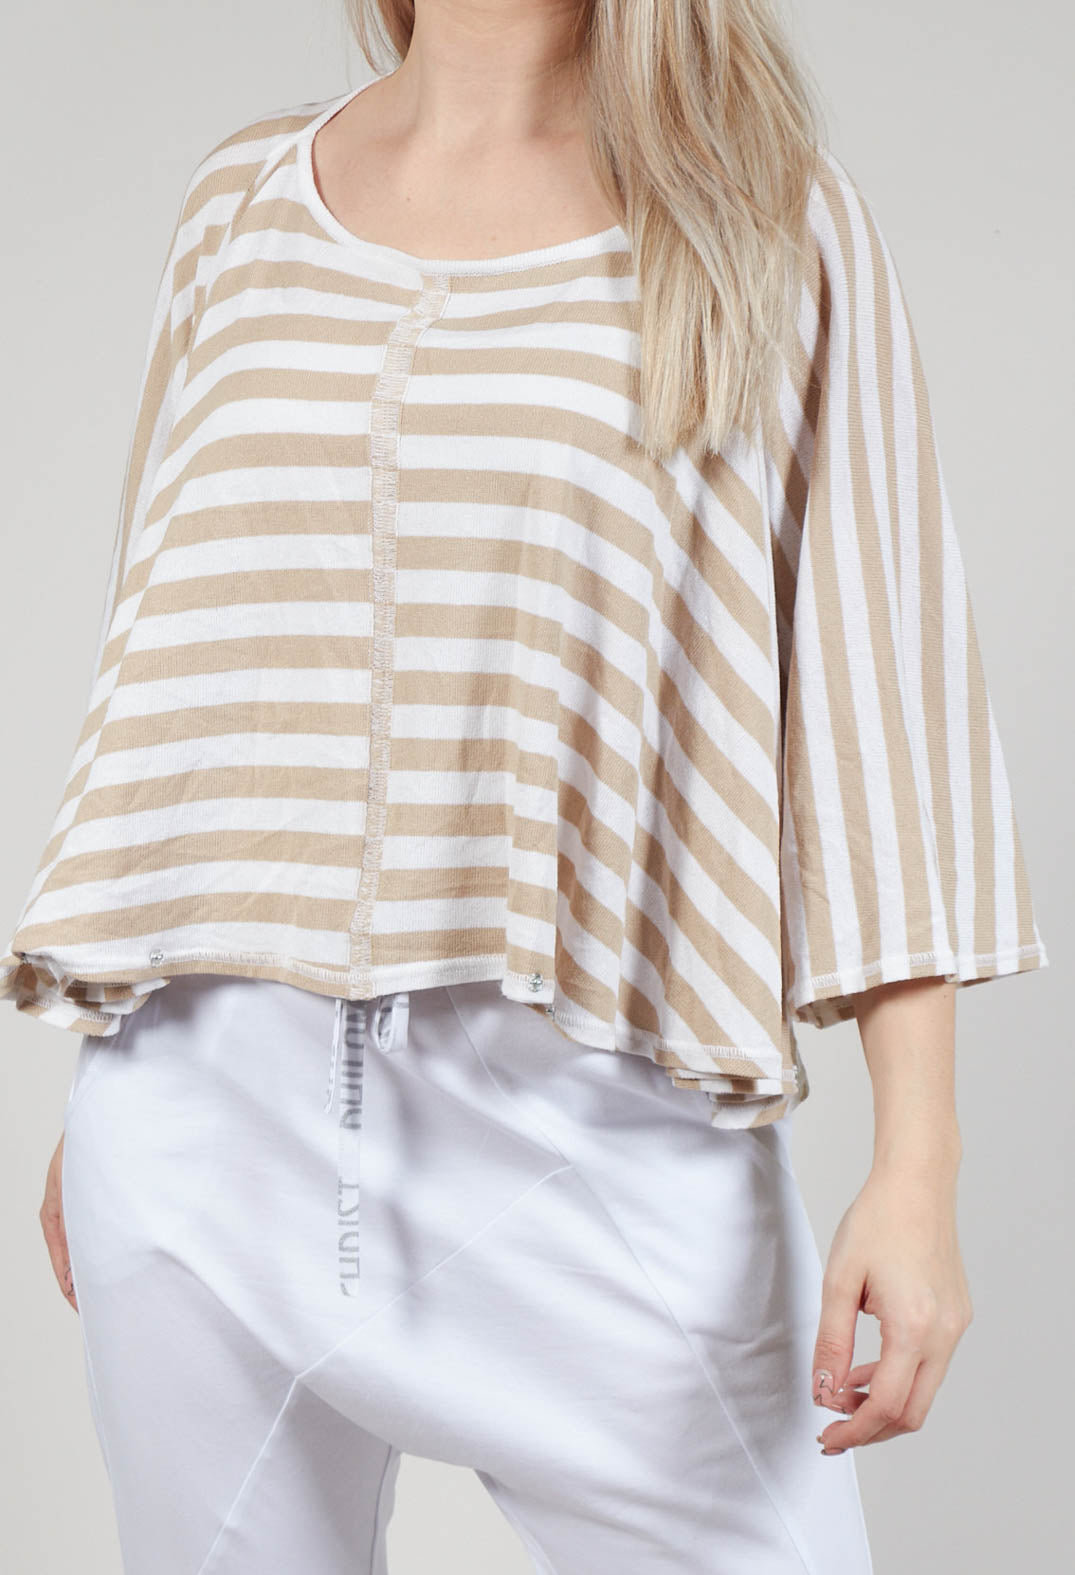 Adjustable Pleat Top in White Sand